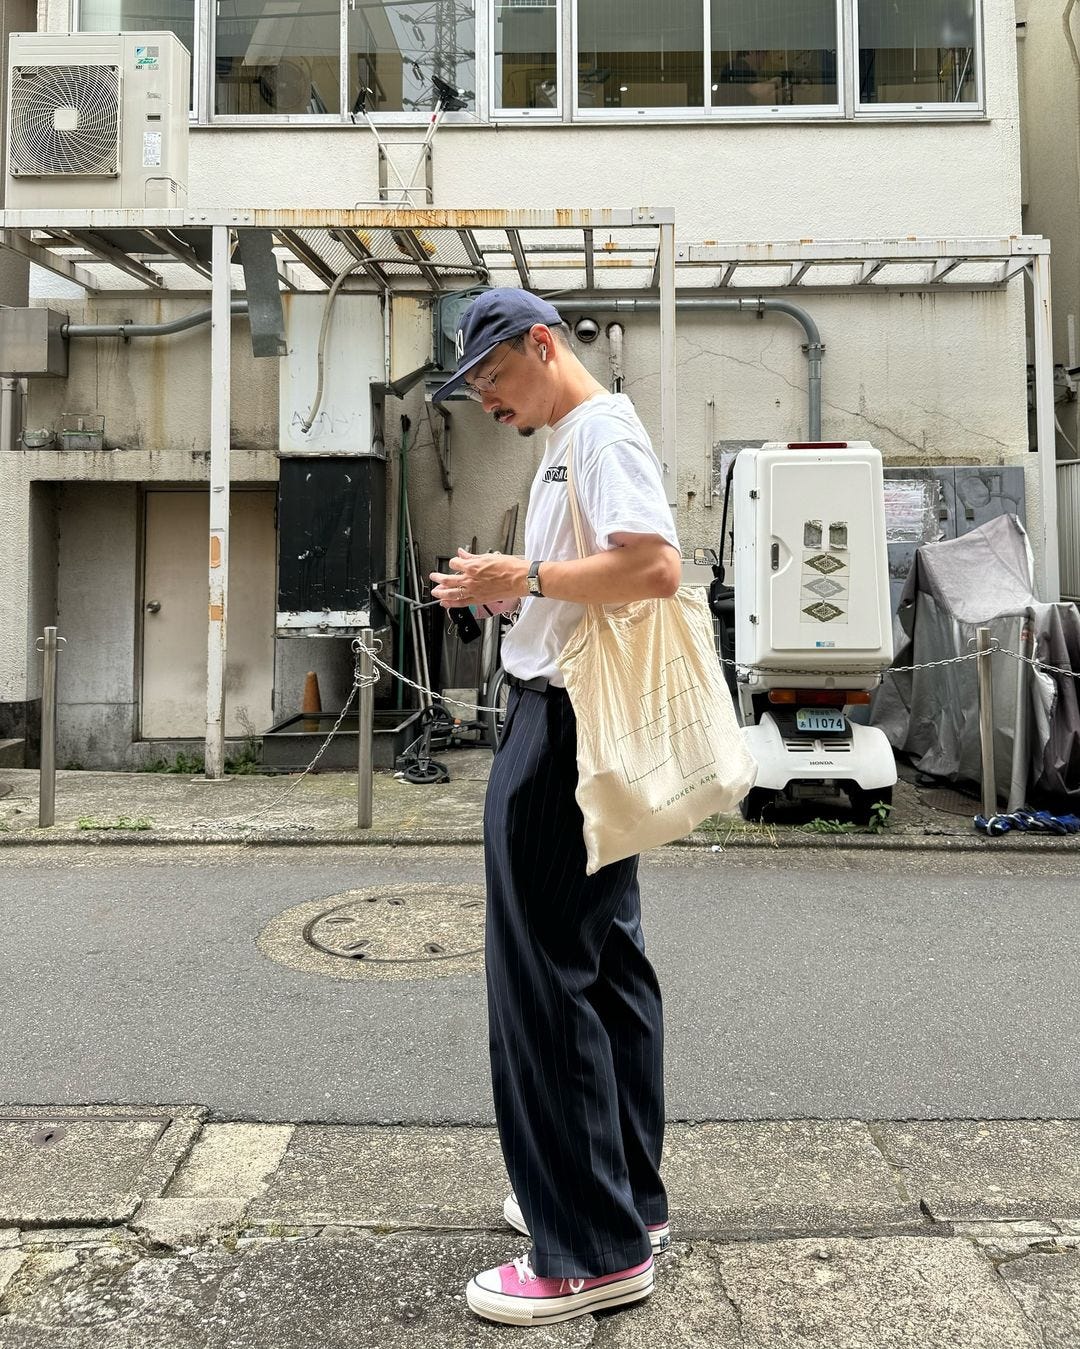 man from the side, standing in an alley wearing a blue baseball cap, white t-shirt, navy pants and pink sneakers